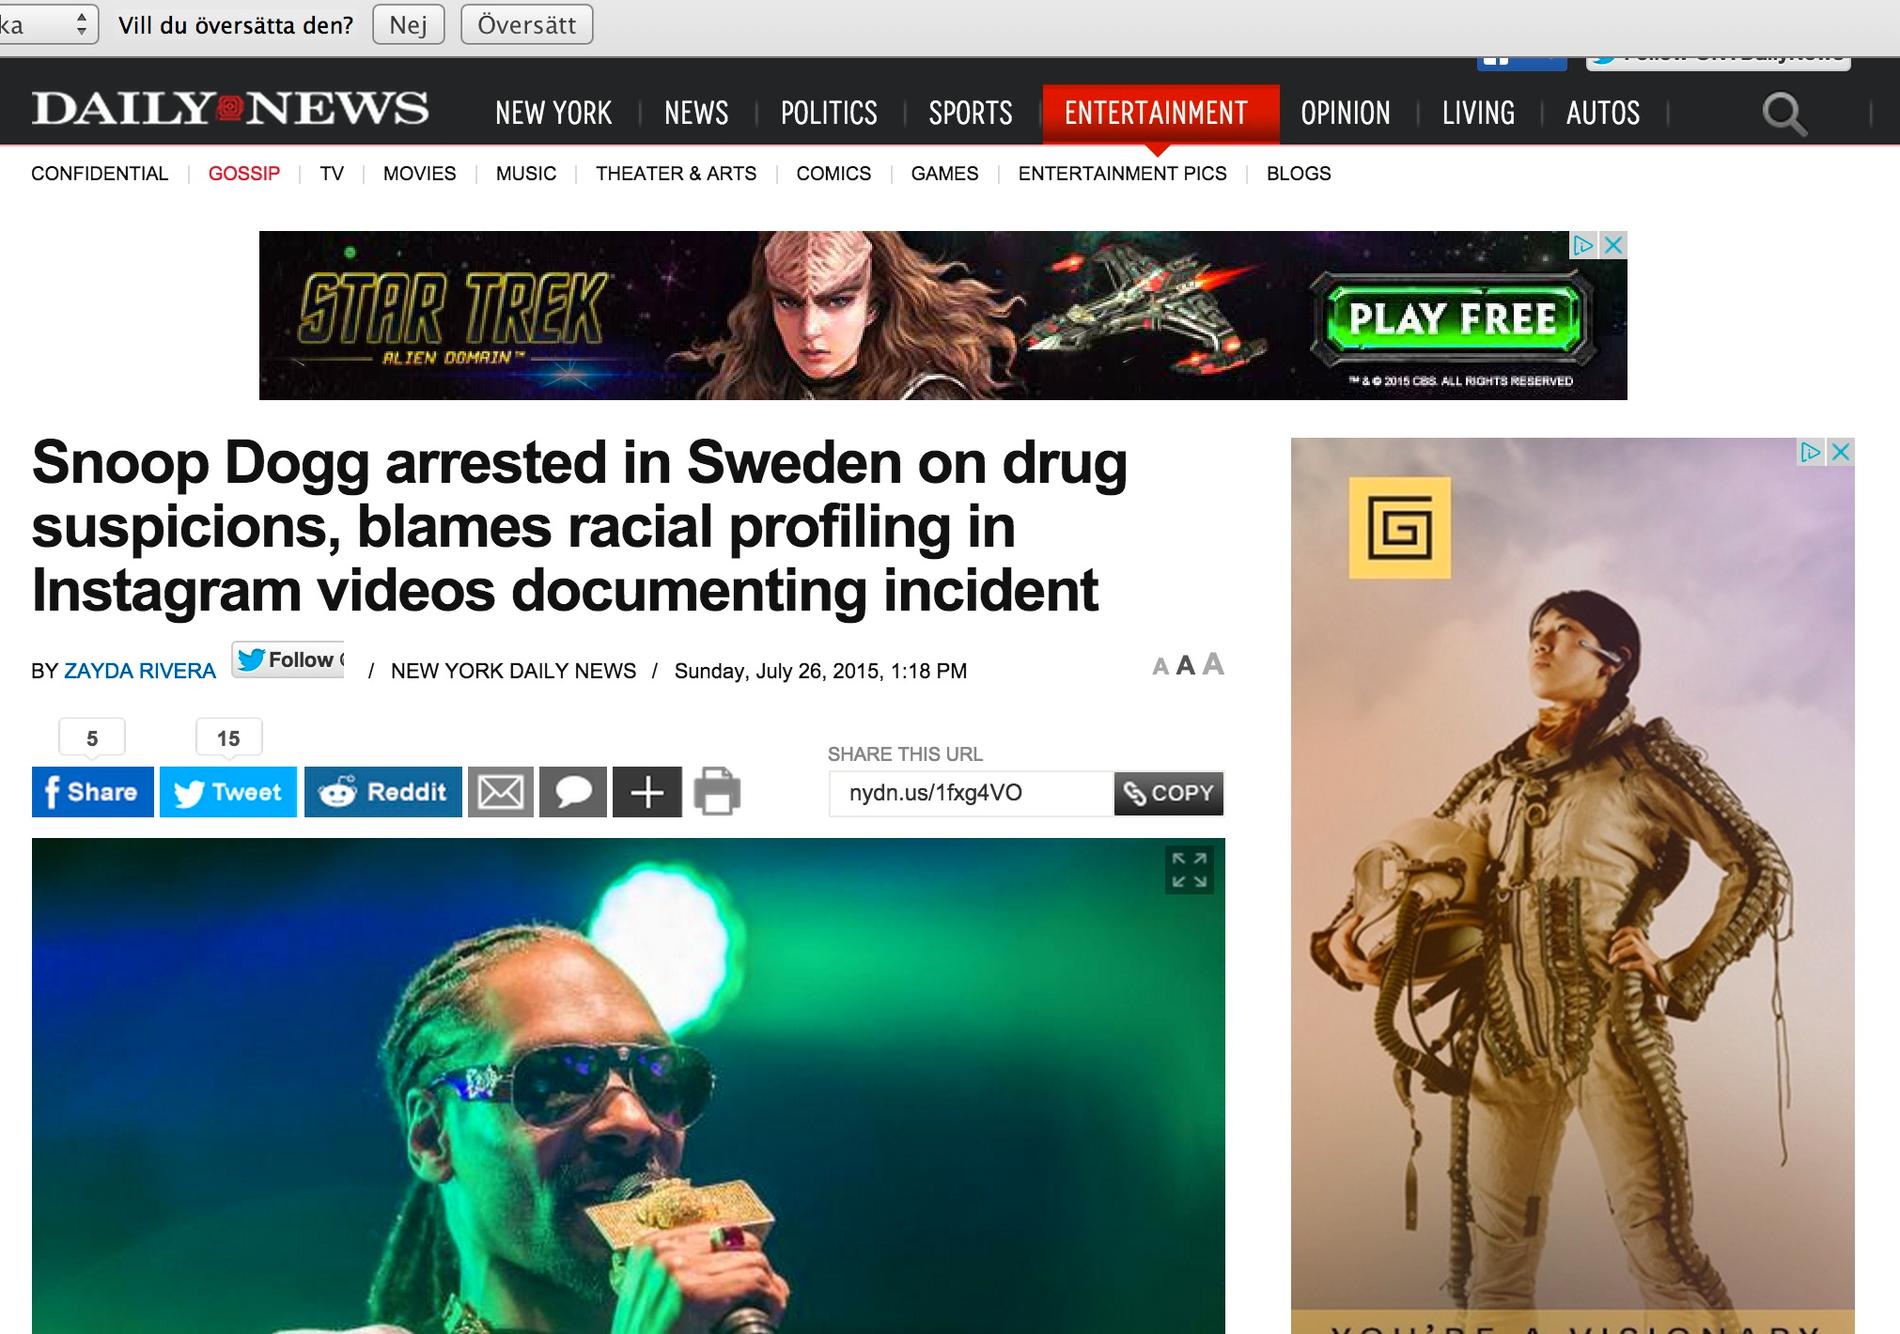 NY Daily News Snoop Dogg arrested in Sweden on drug suspicions, blames racial profiling in Instagram videos documenting incident